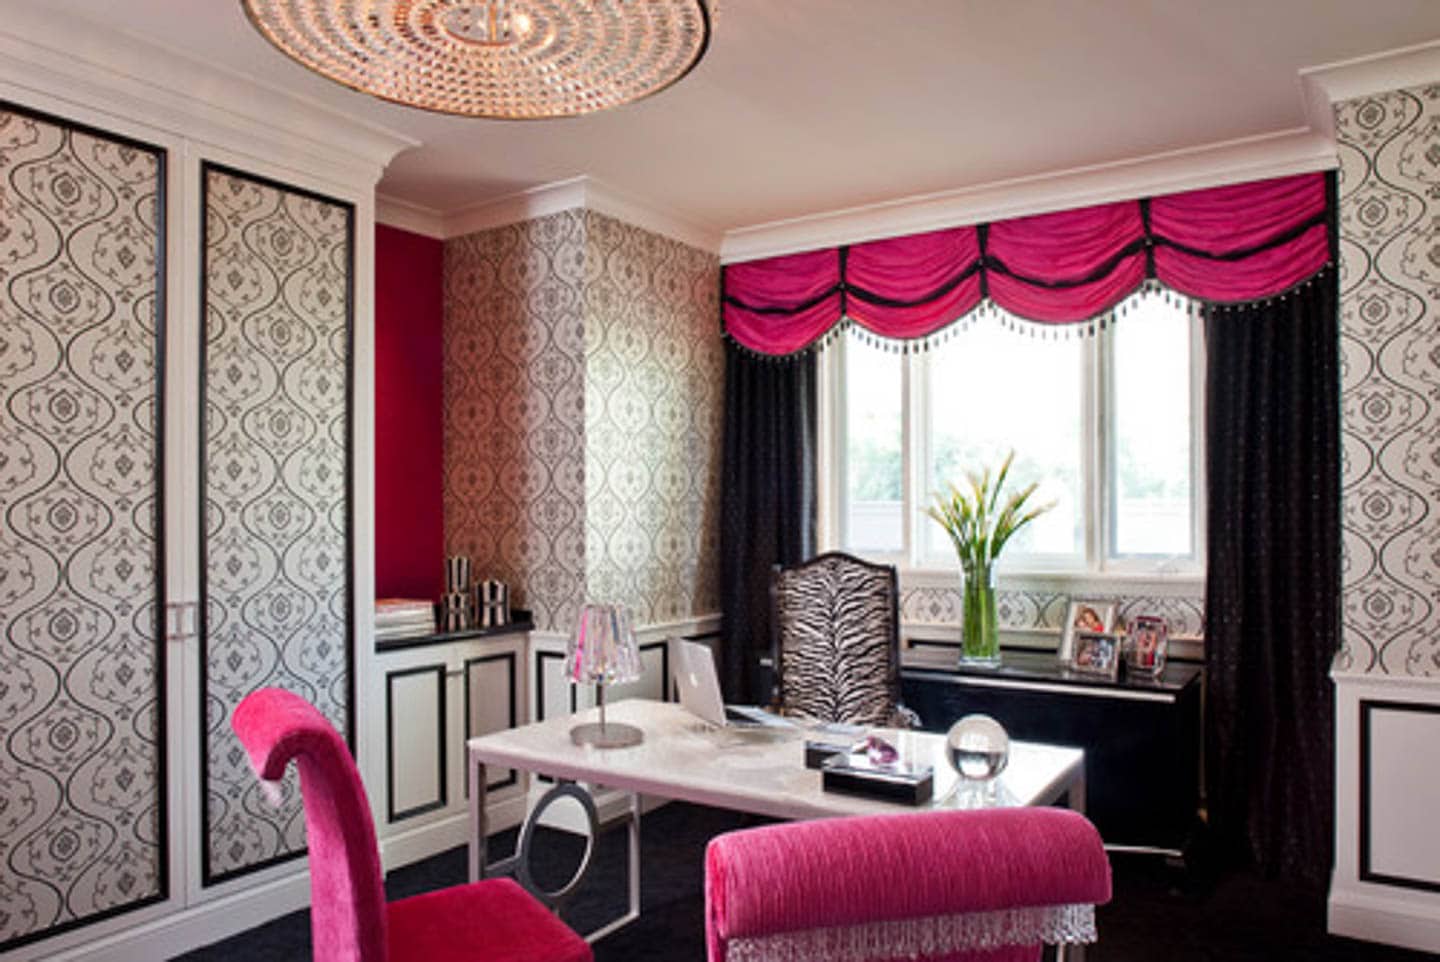 Black and white office with fuchsia curtains and side chairs